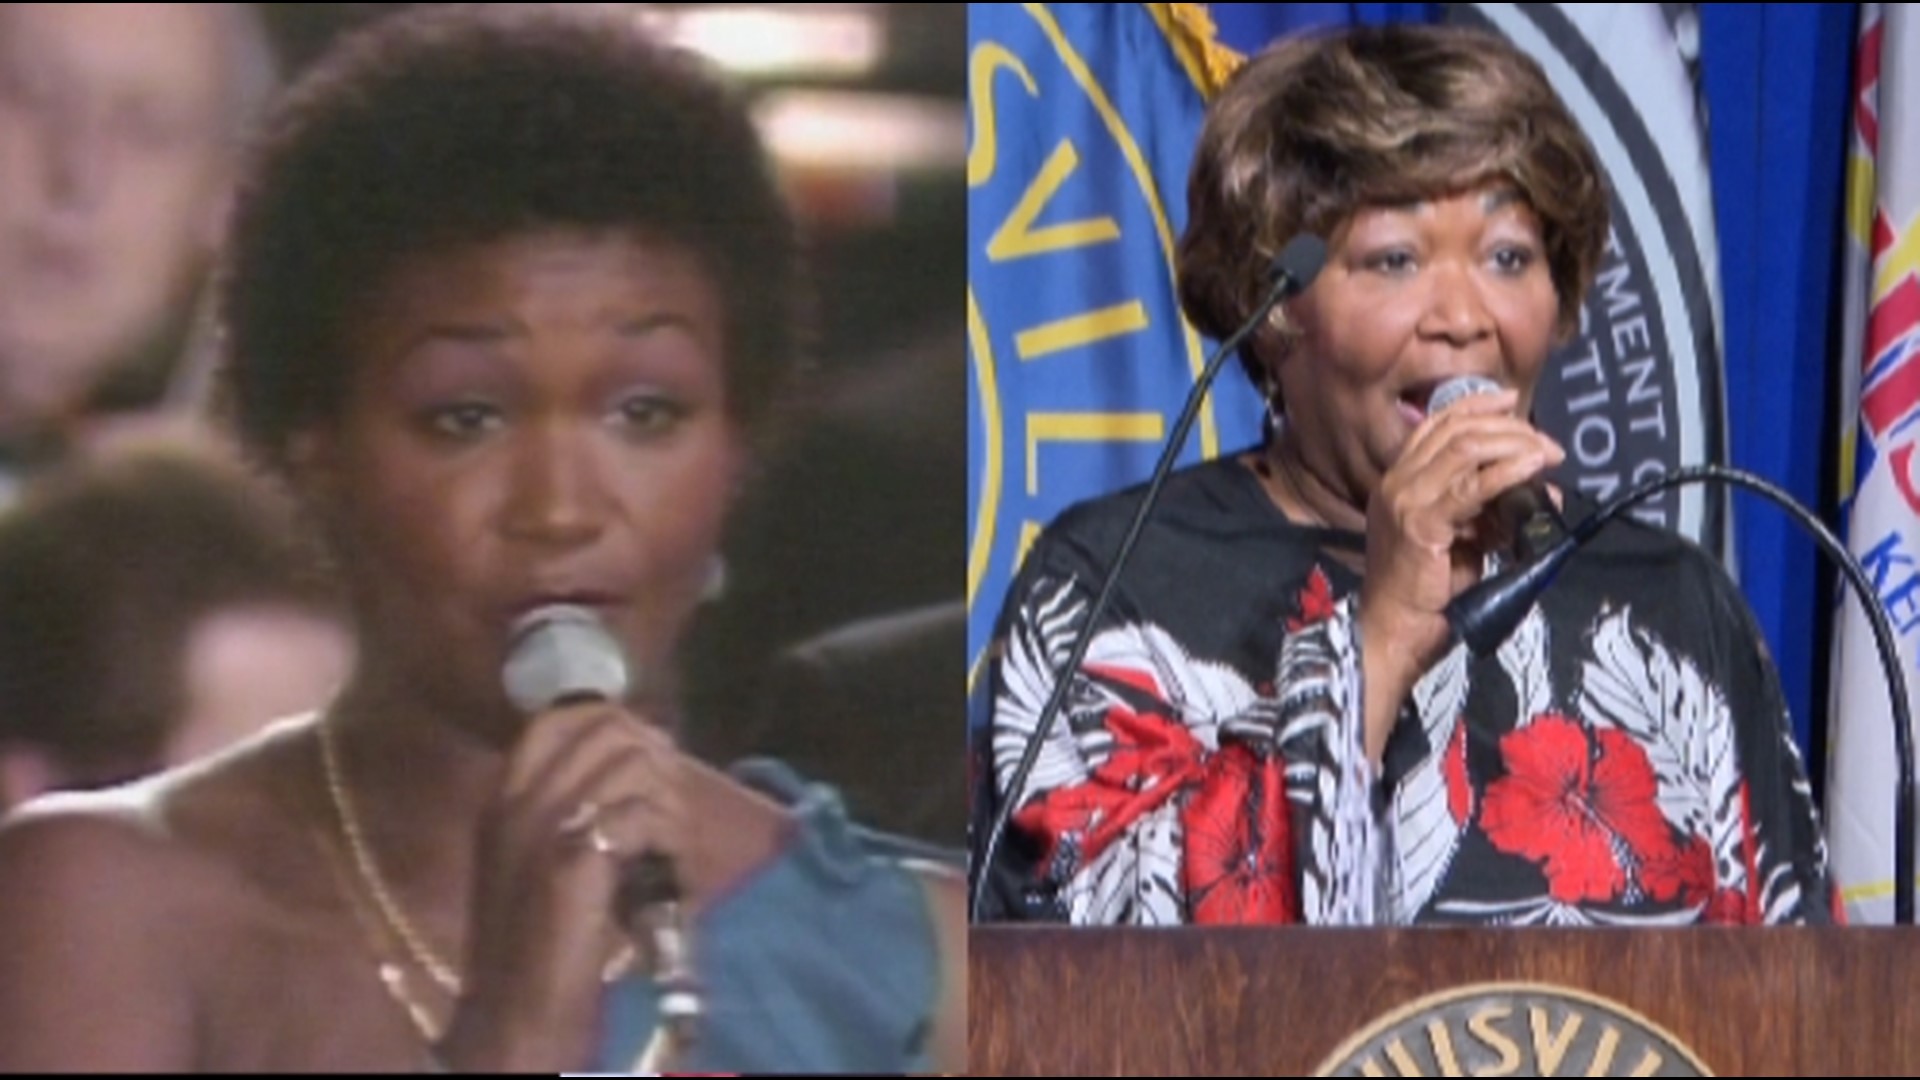 Miller took the stage at the new mayor's inauguration to sing a beloved anthem. Here is her singing the song now paired with the original performance.